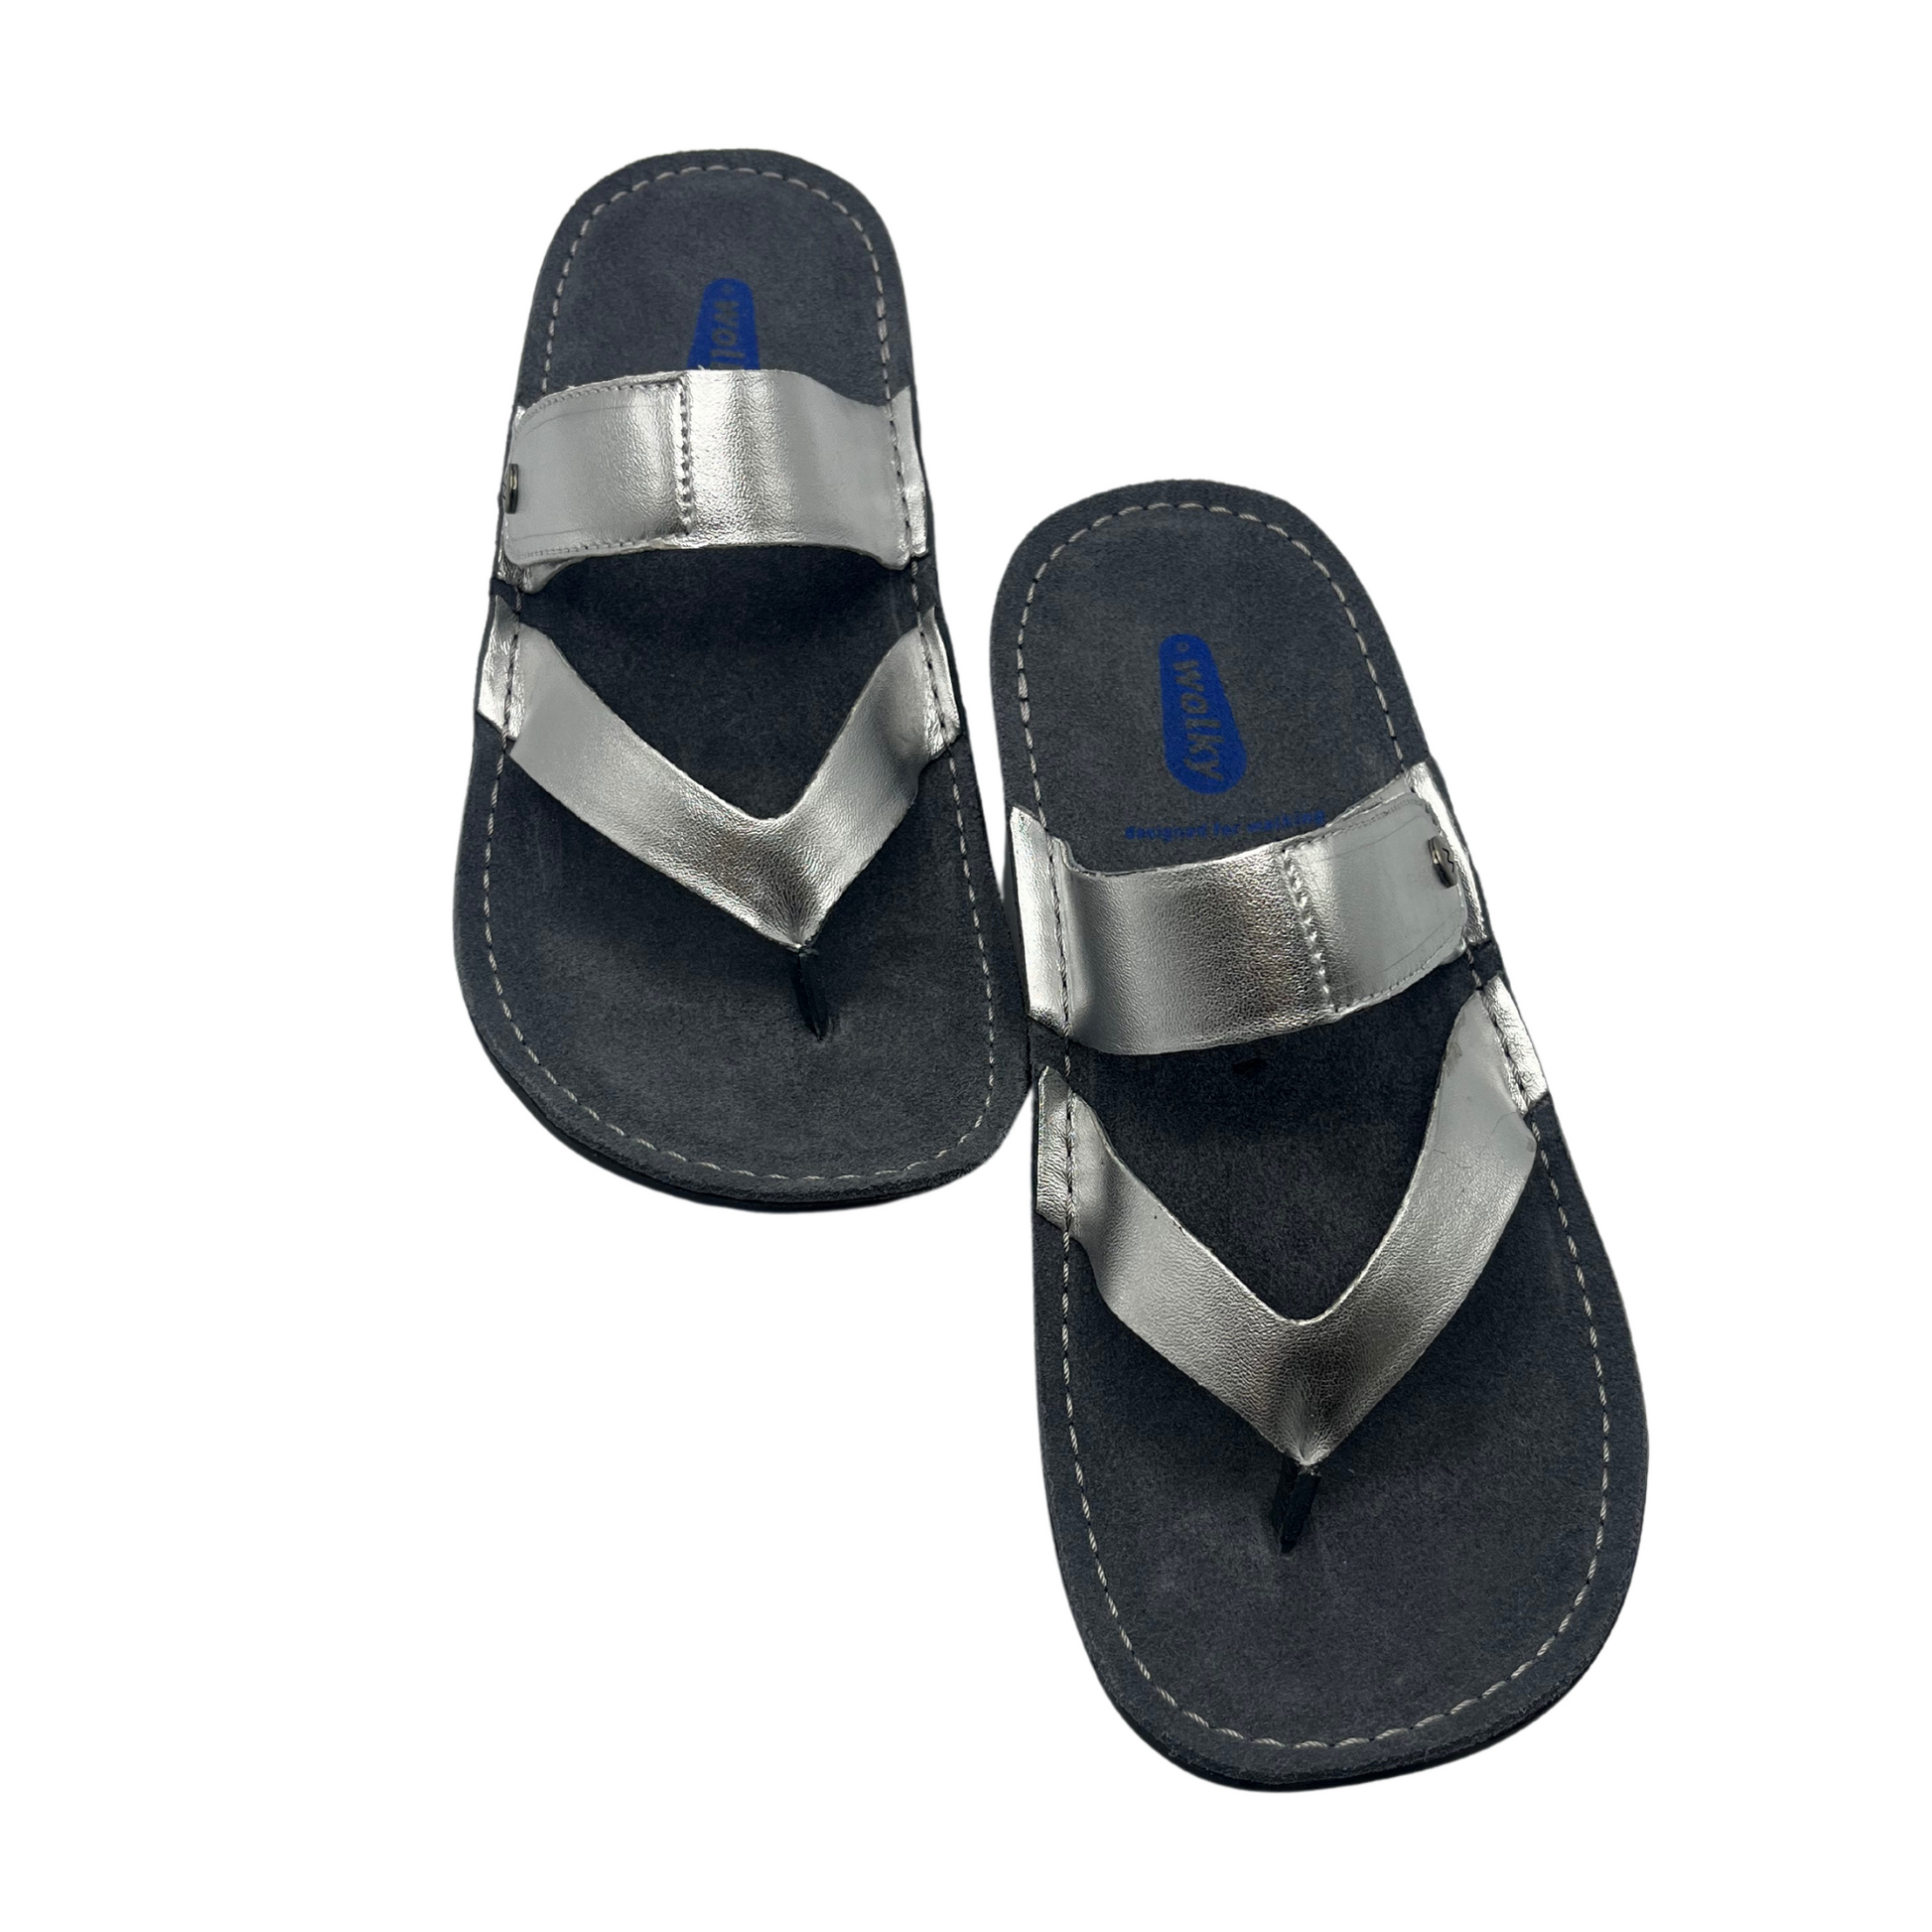 Top view of a pair of metallic silver sandals with a wedge heel and an adjustable strap